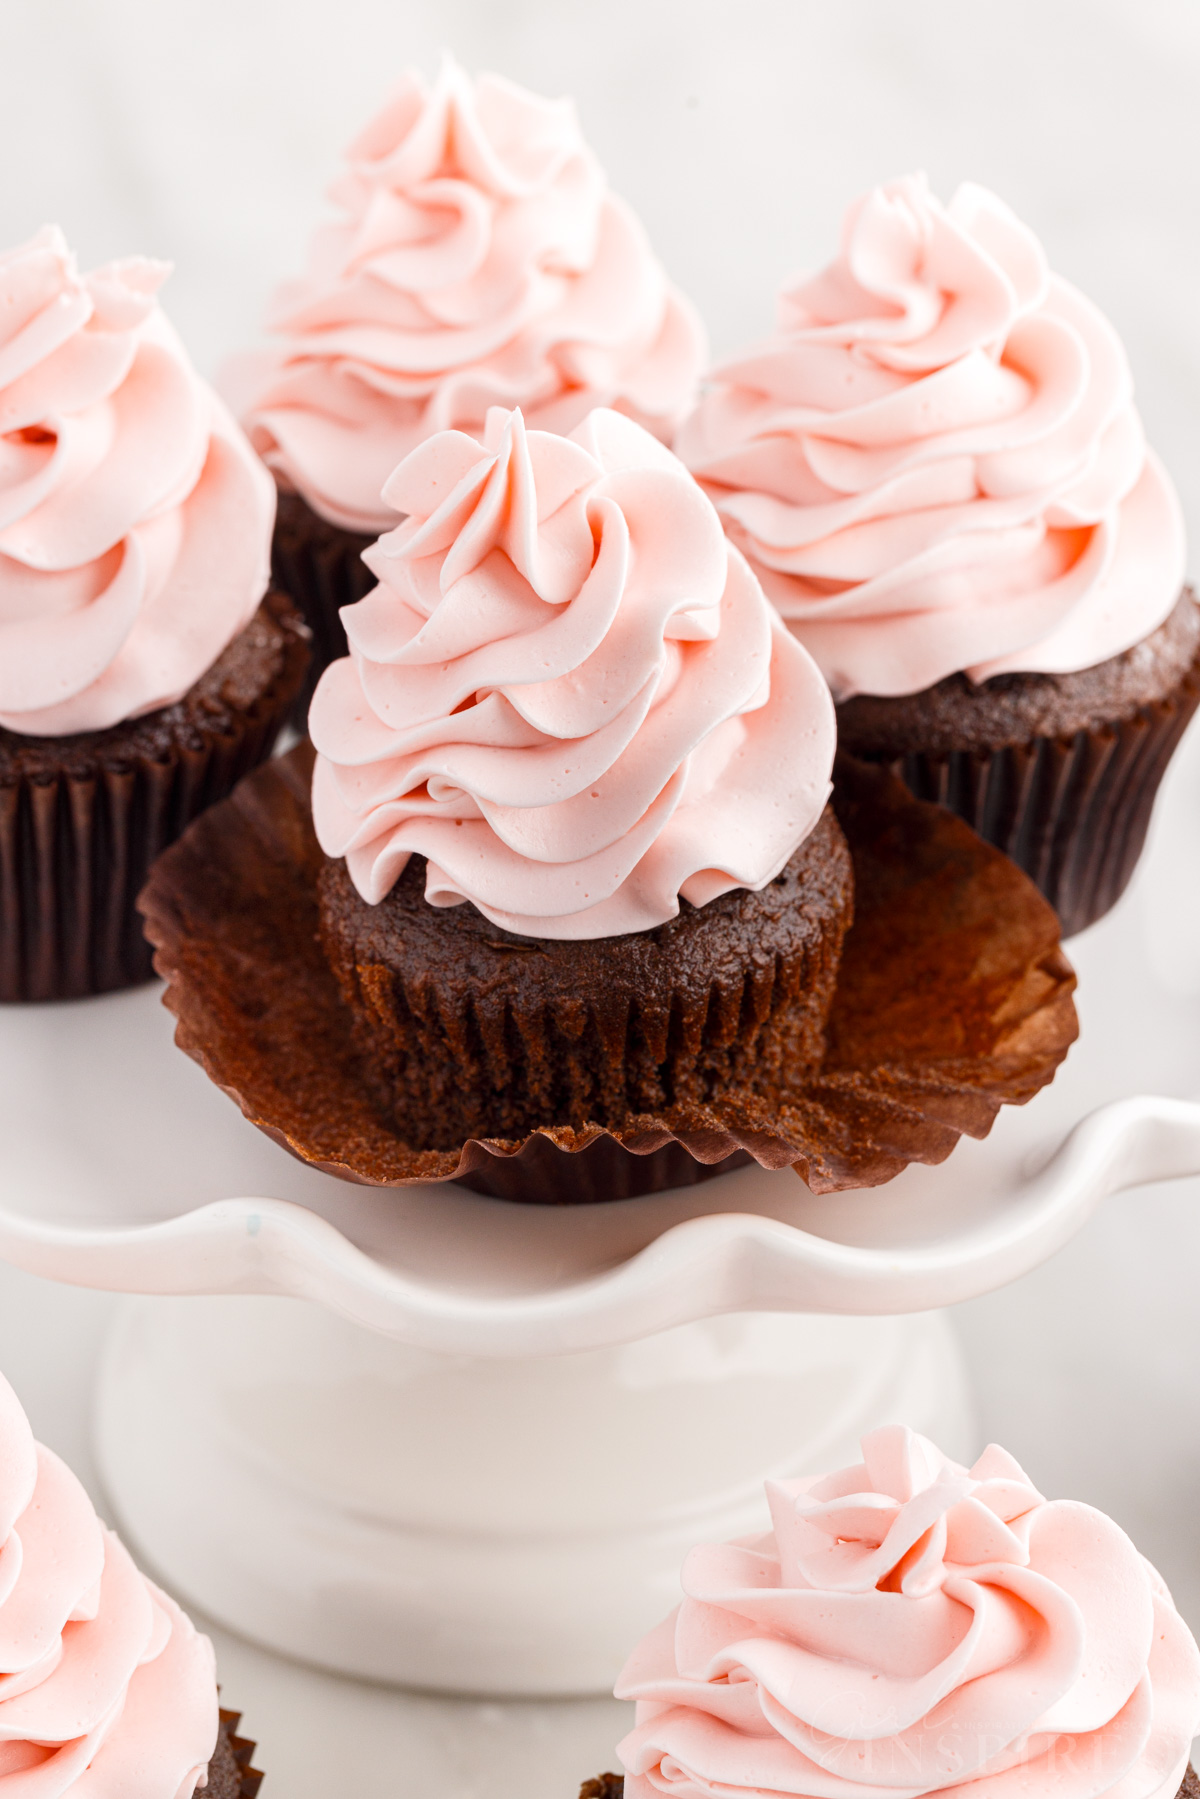 Four chocolate cupcakes topped with big swirls of strawberry frosting on a cake platter.